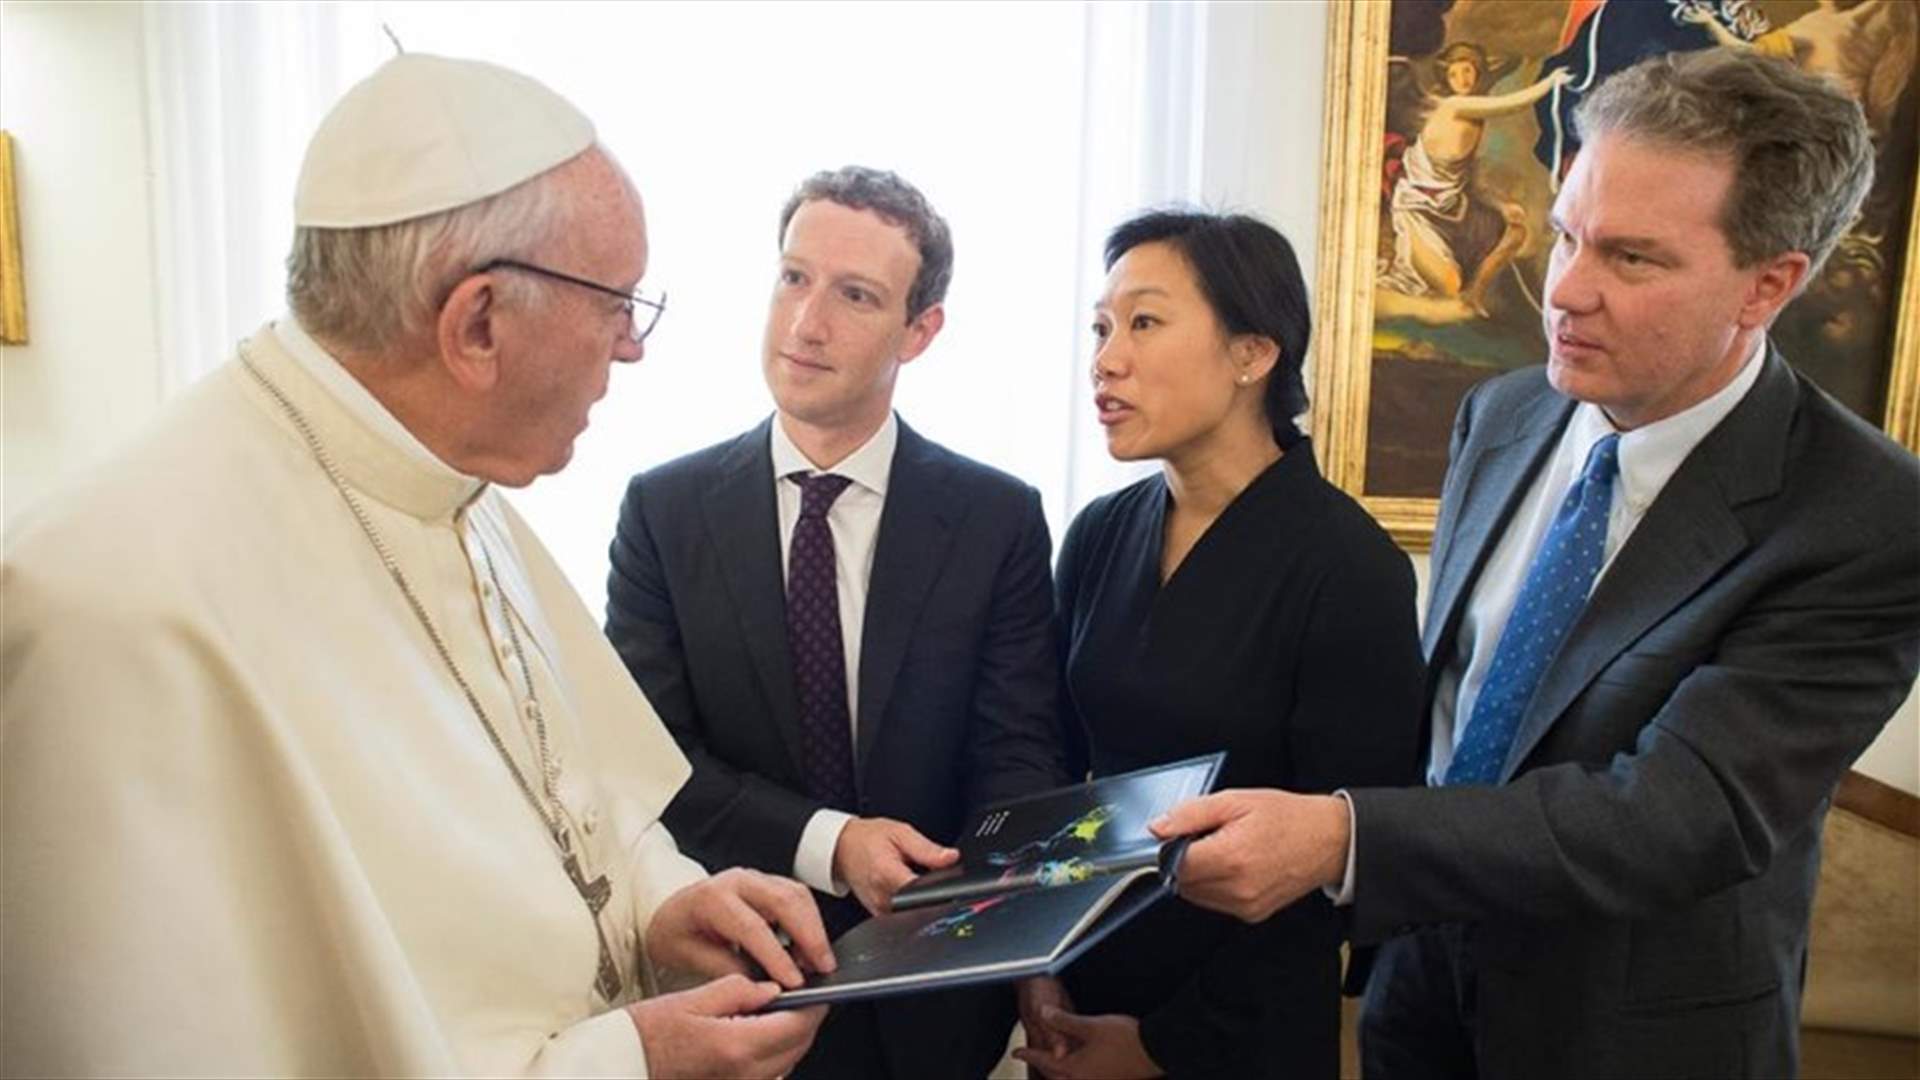 Pope Francis meets with Facebook founder Zuckerberg at Vatican